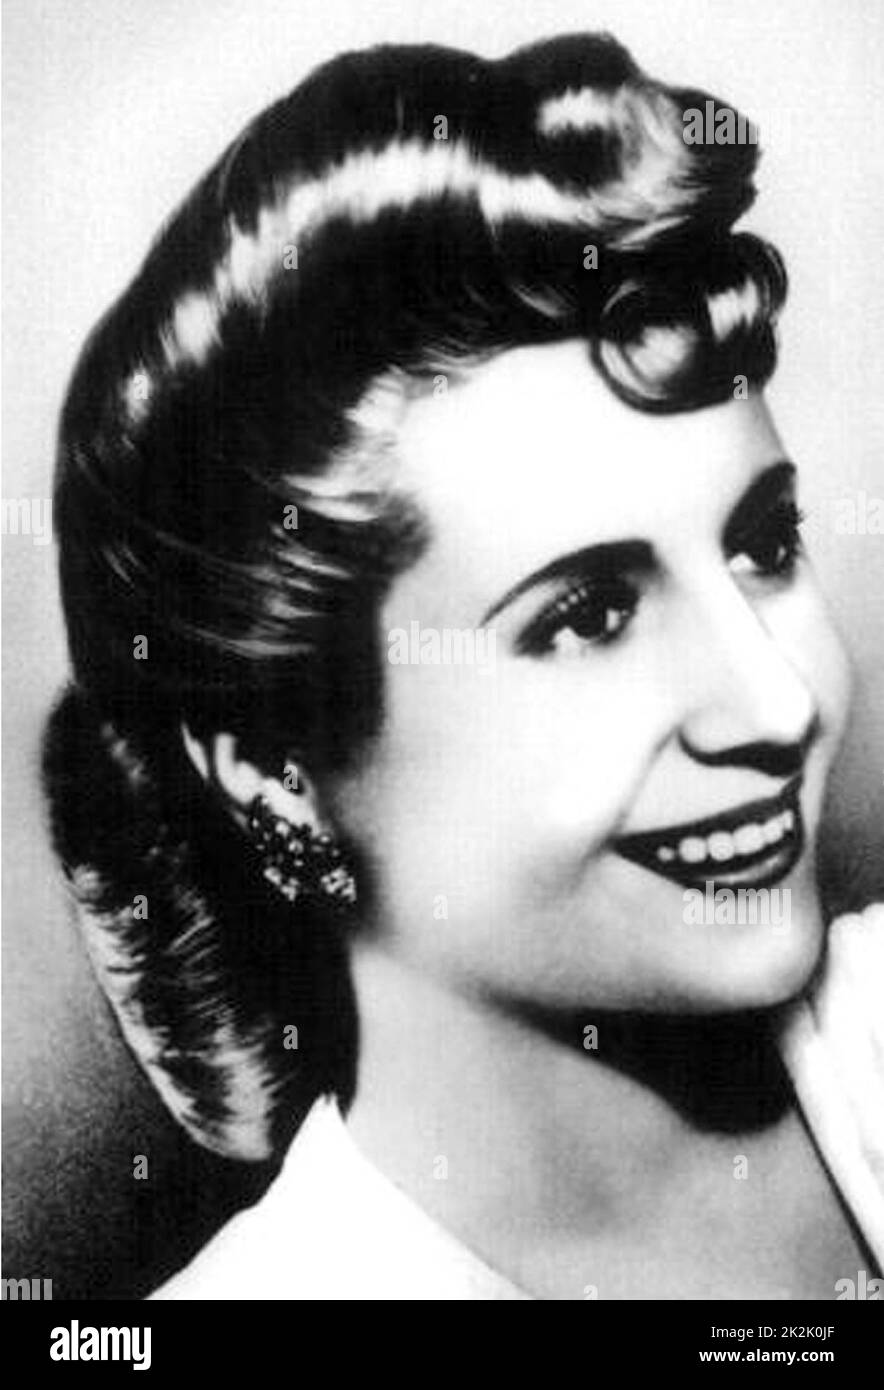 María Eva Duarte de Perón 7 May 1919 – 26 July 1952, was the second wife of President Juan Perón (1895–1974) and served as the First Lady of Argentina from 1946 until her death in 1952. Stock Photo